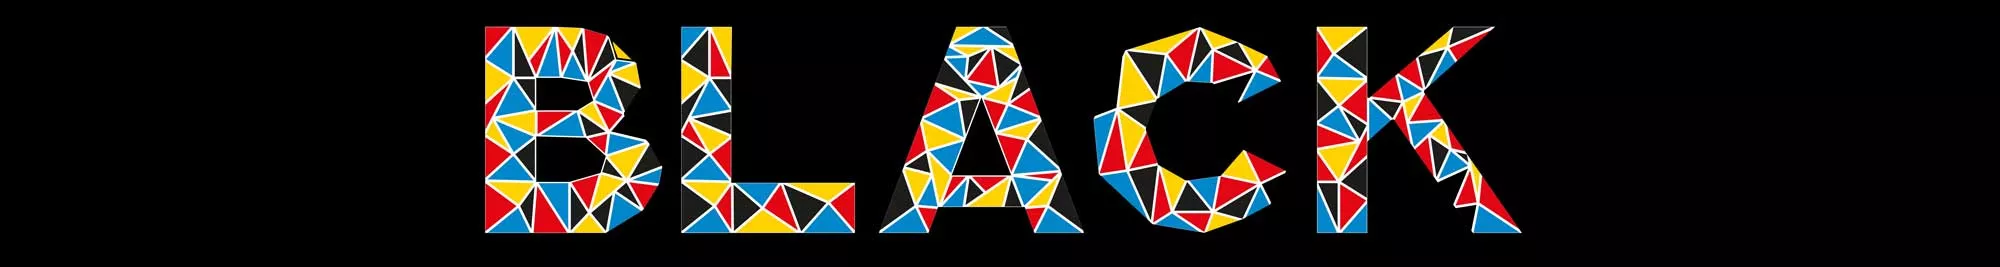 BLACK letters formed with bold graphic yellow, red, blue and black triangles.